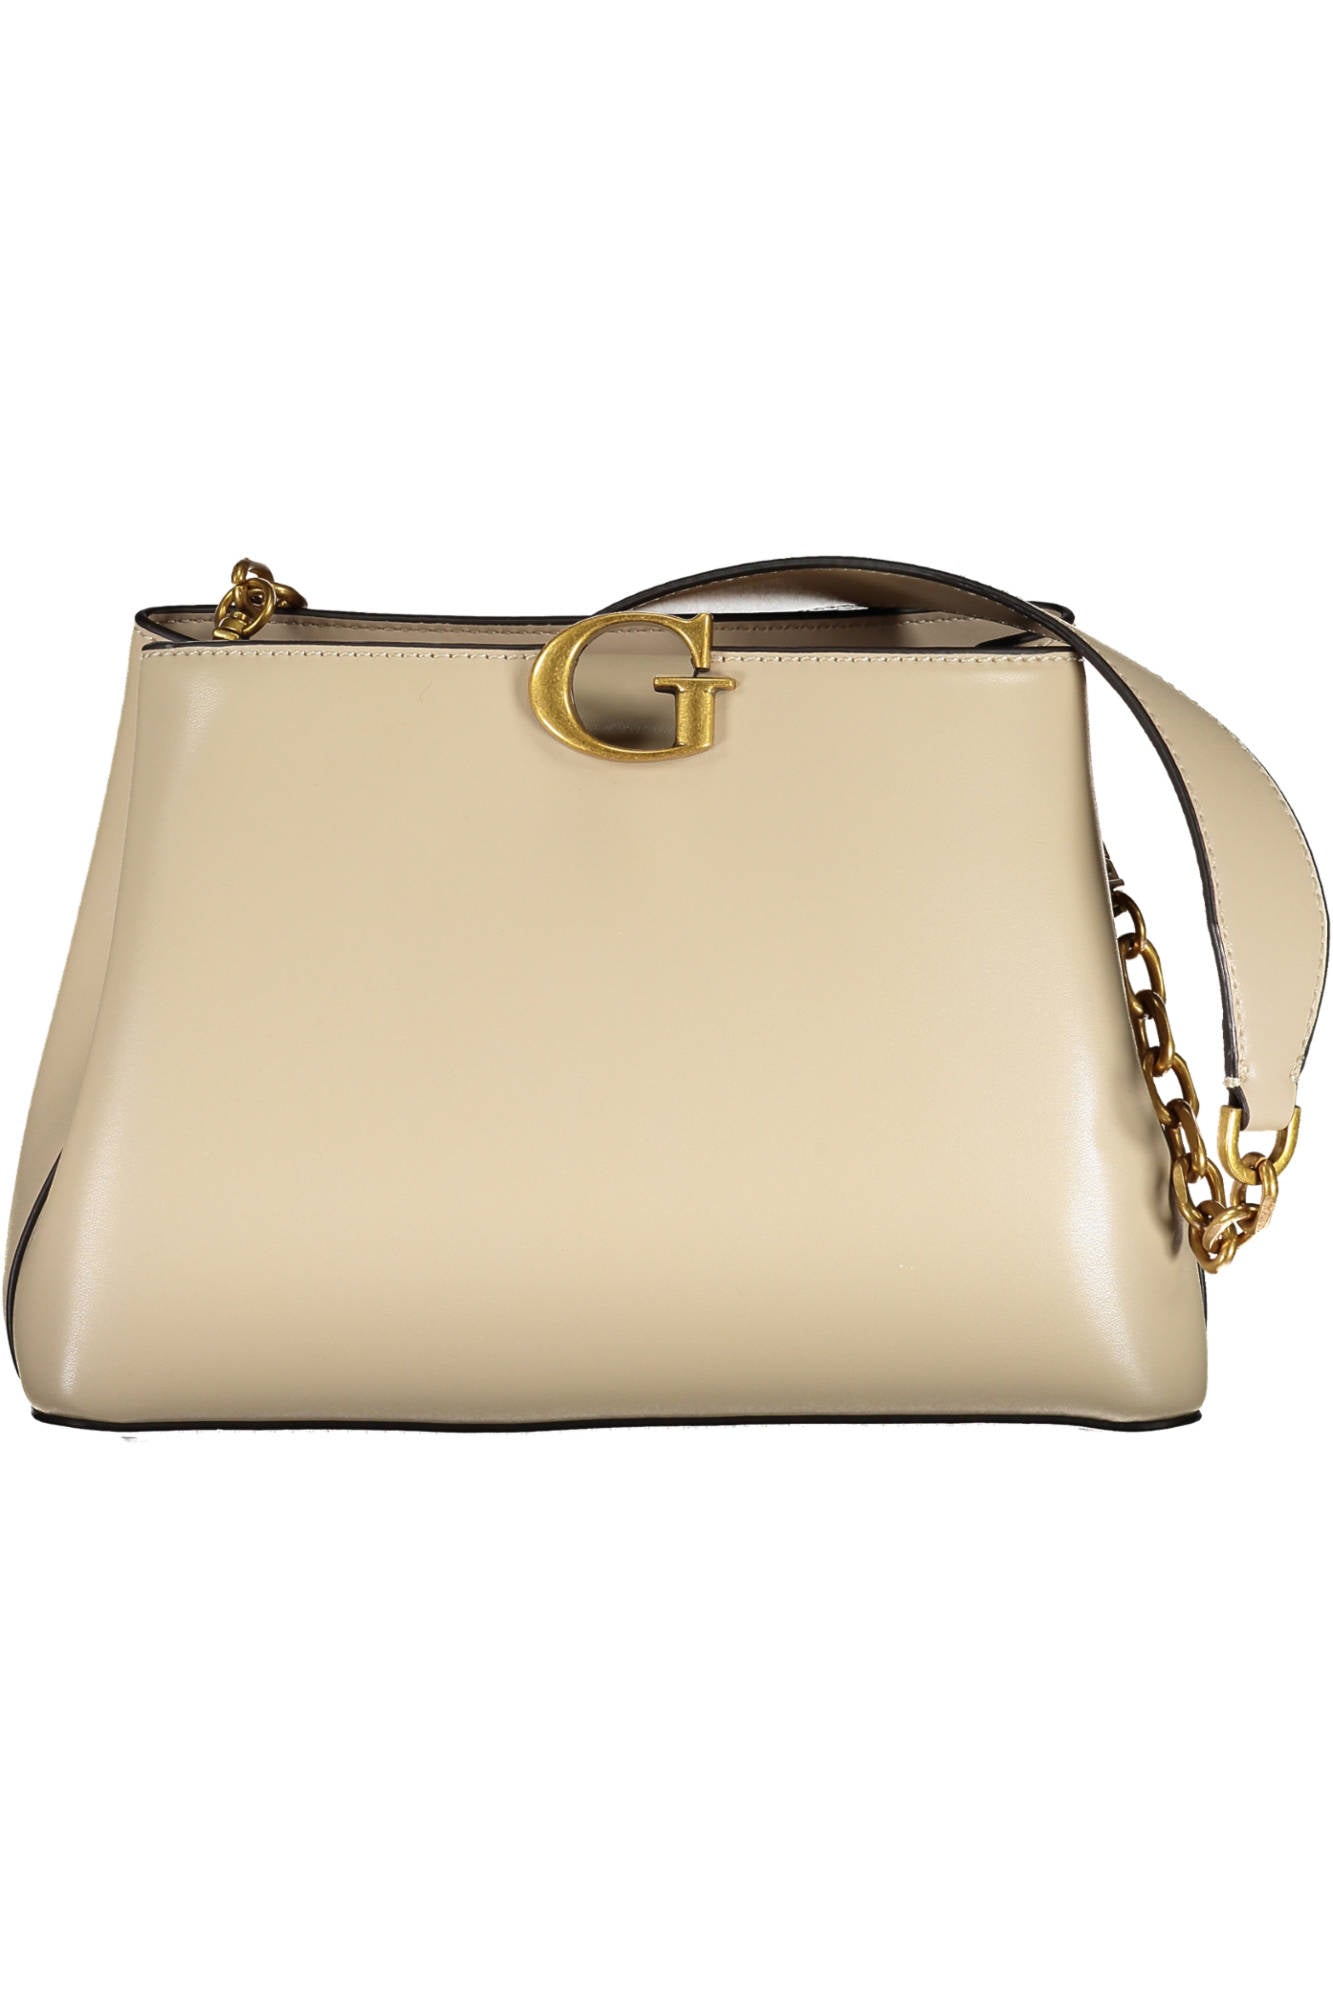 Guess bag new collection  Lavinia Shopping Brand In USA  Facebook